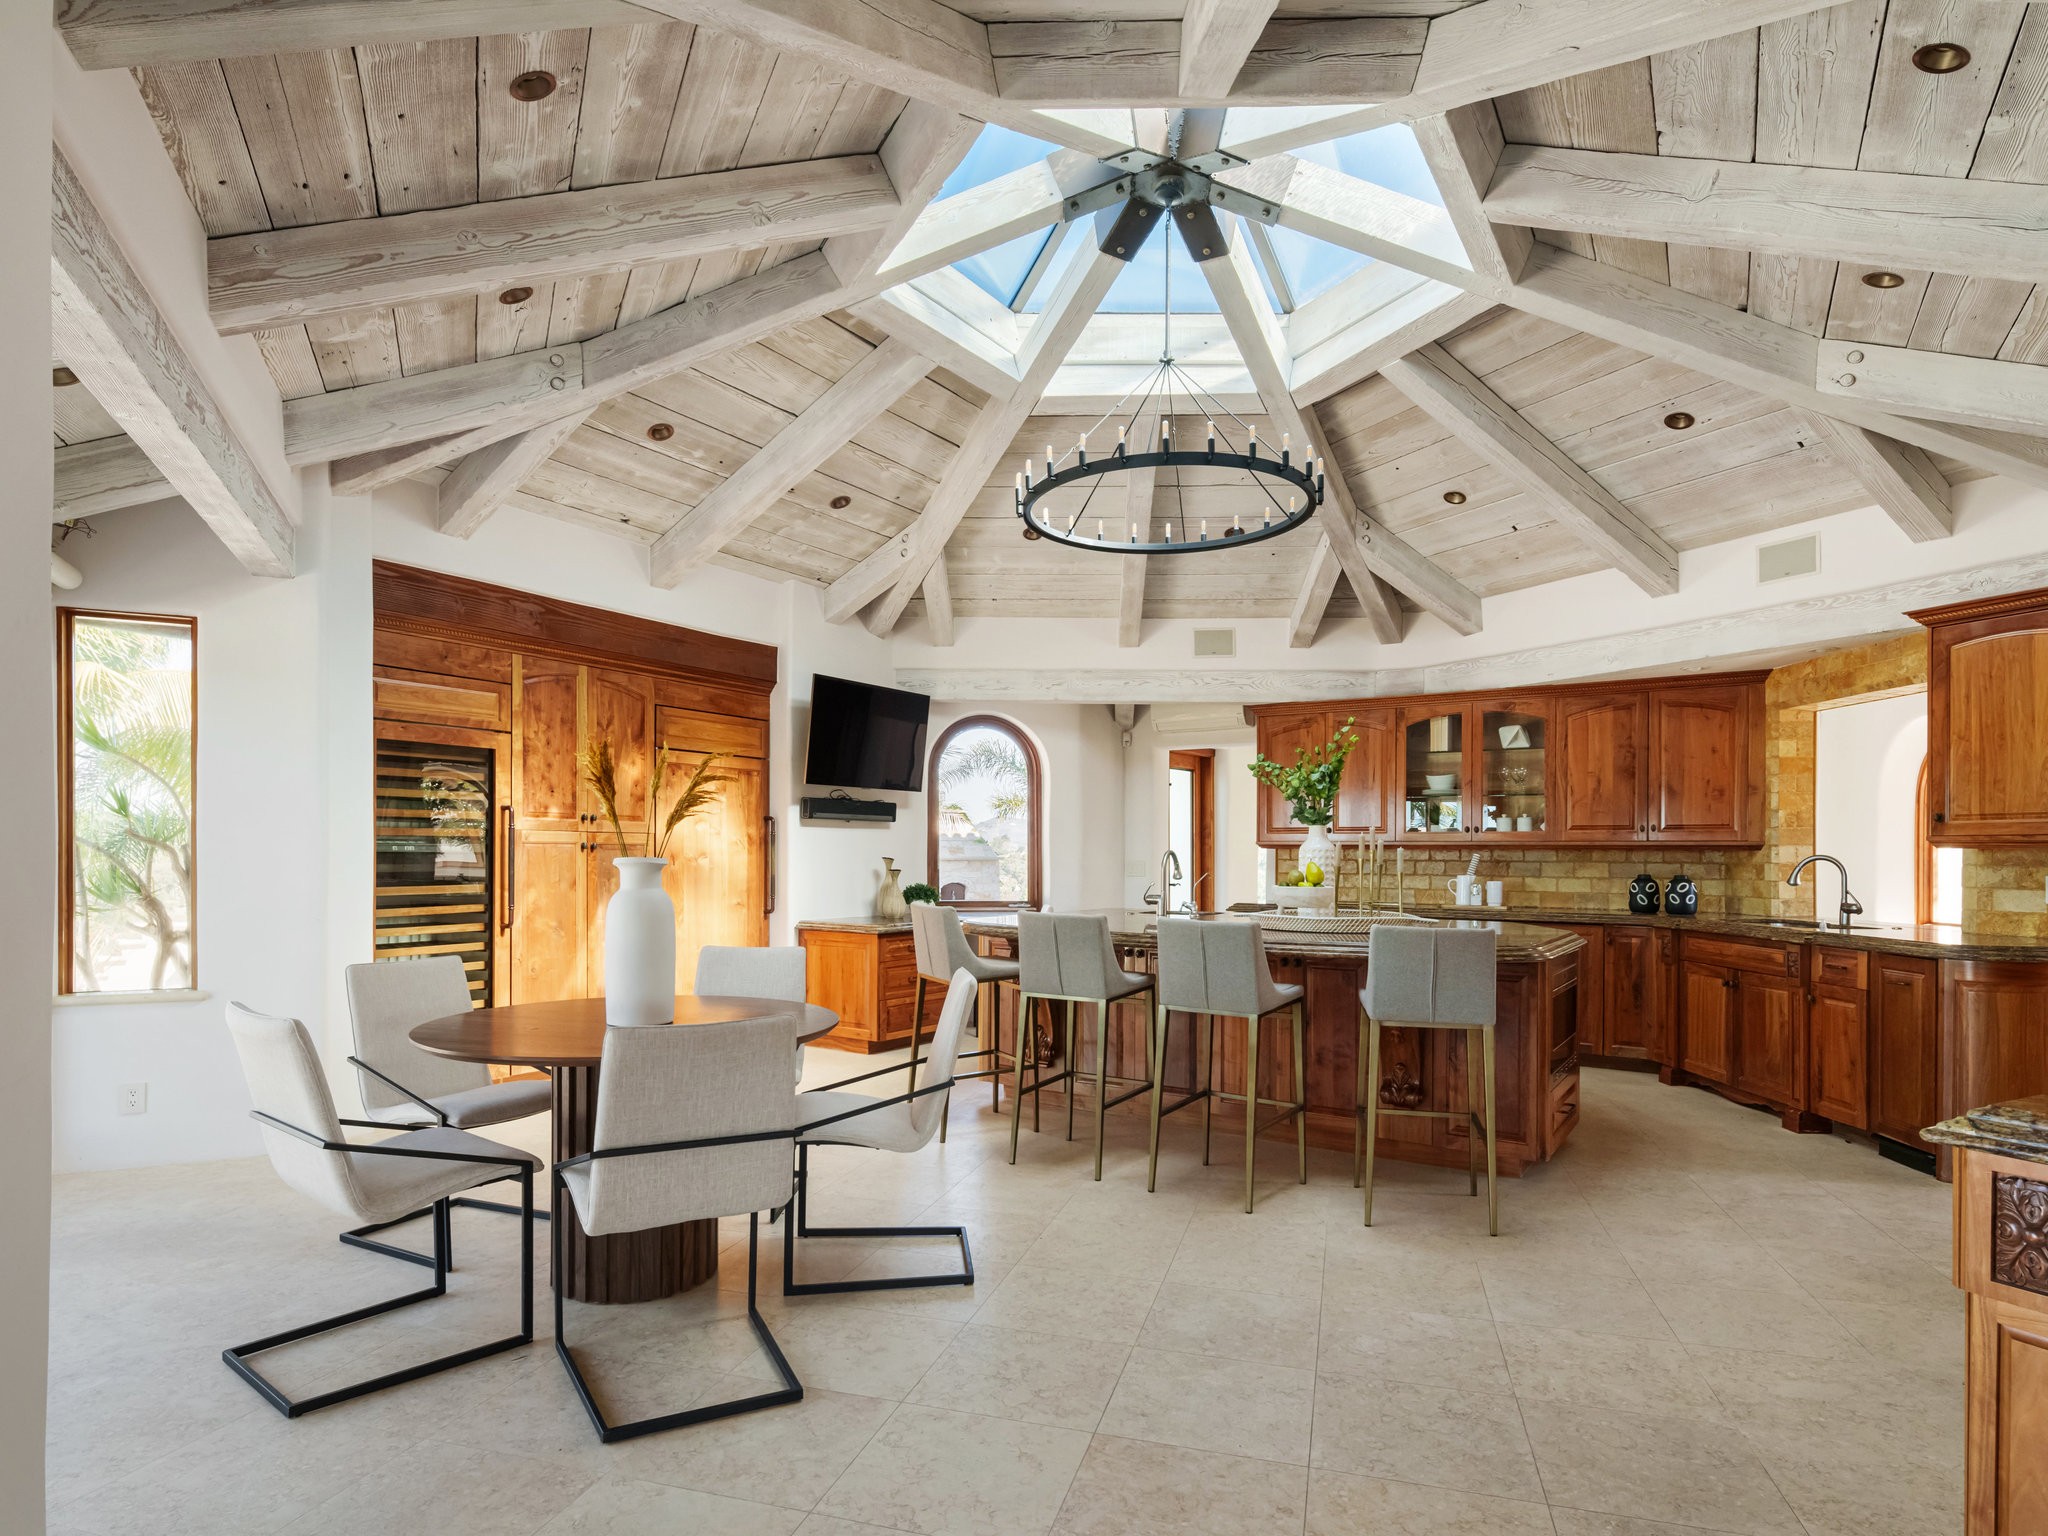 Stunning circular kitchen in a Coronado home with a skylight and open beam ceilings, embodying modern elegance and architectural beauty.